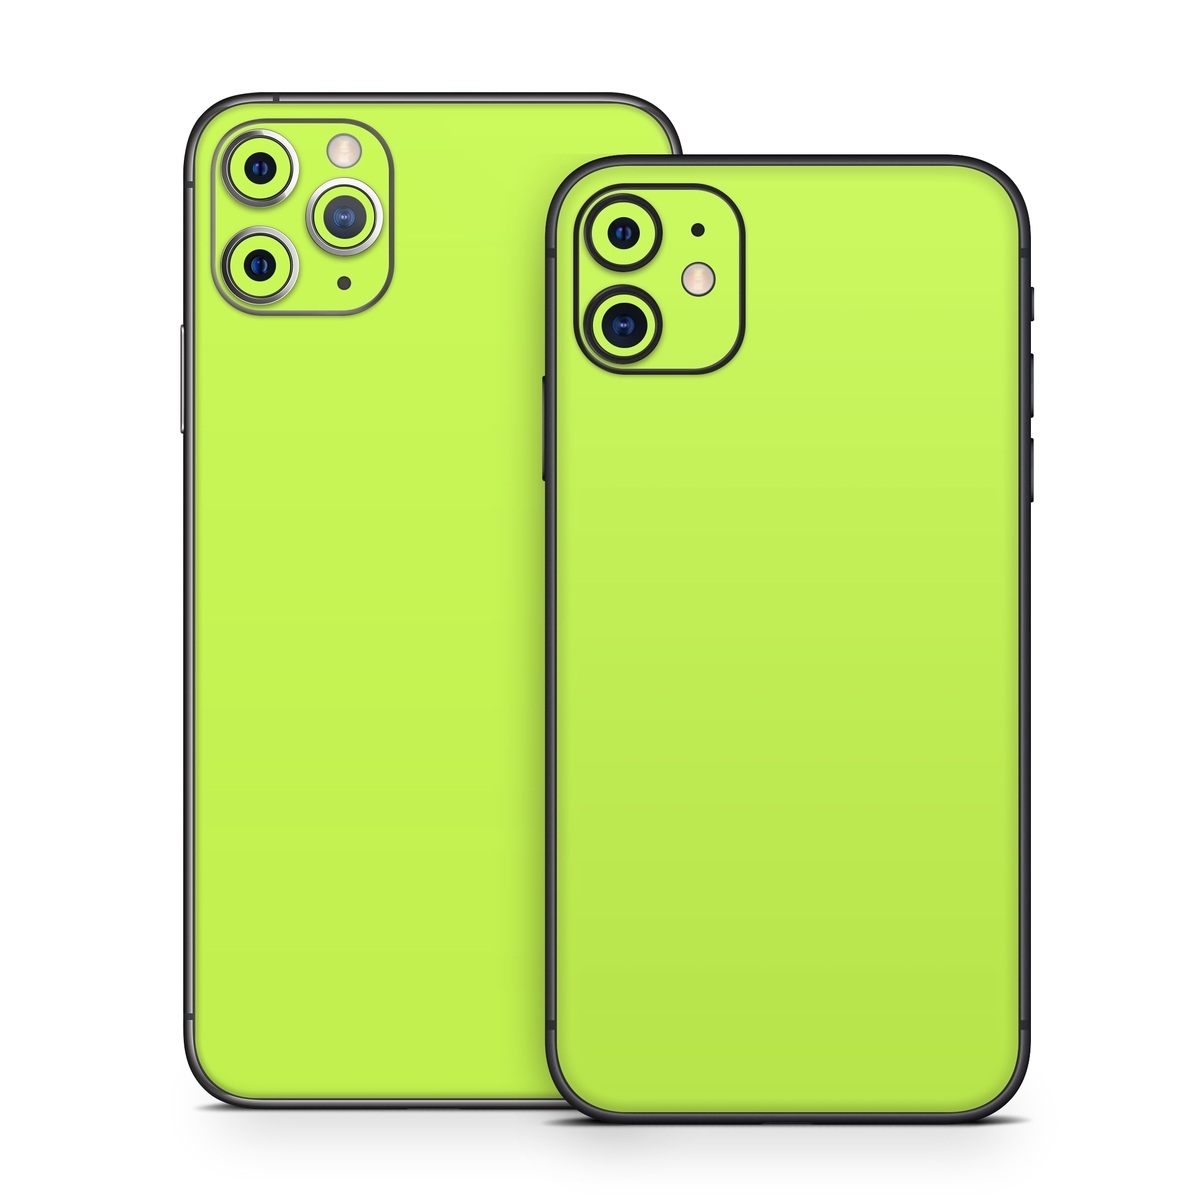 Apple iPhone 11 Skin - Solid State Lime (Image 1)